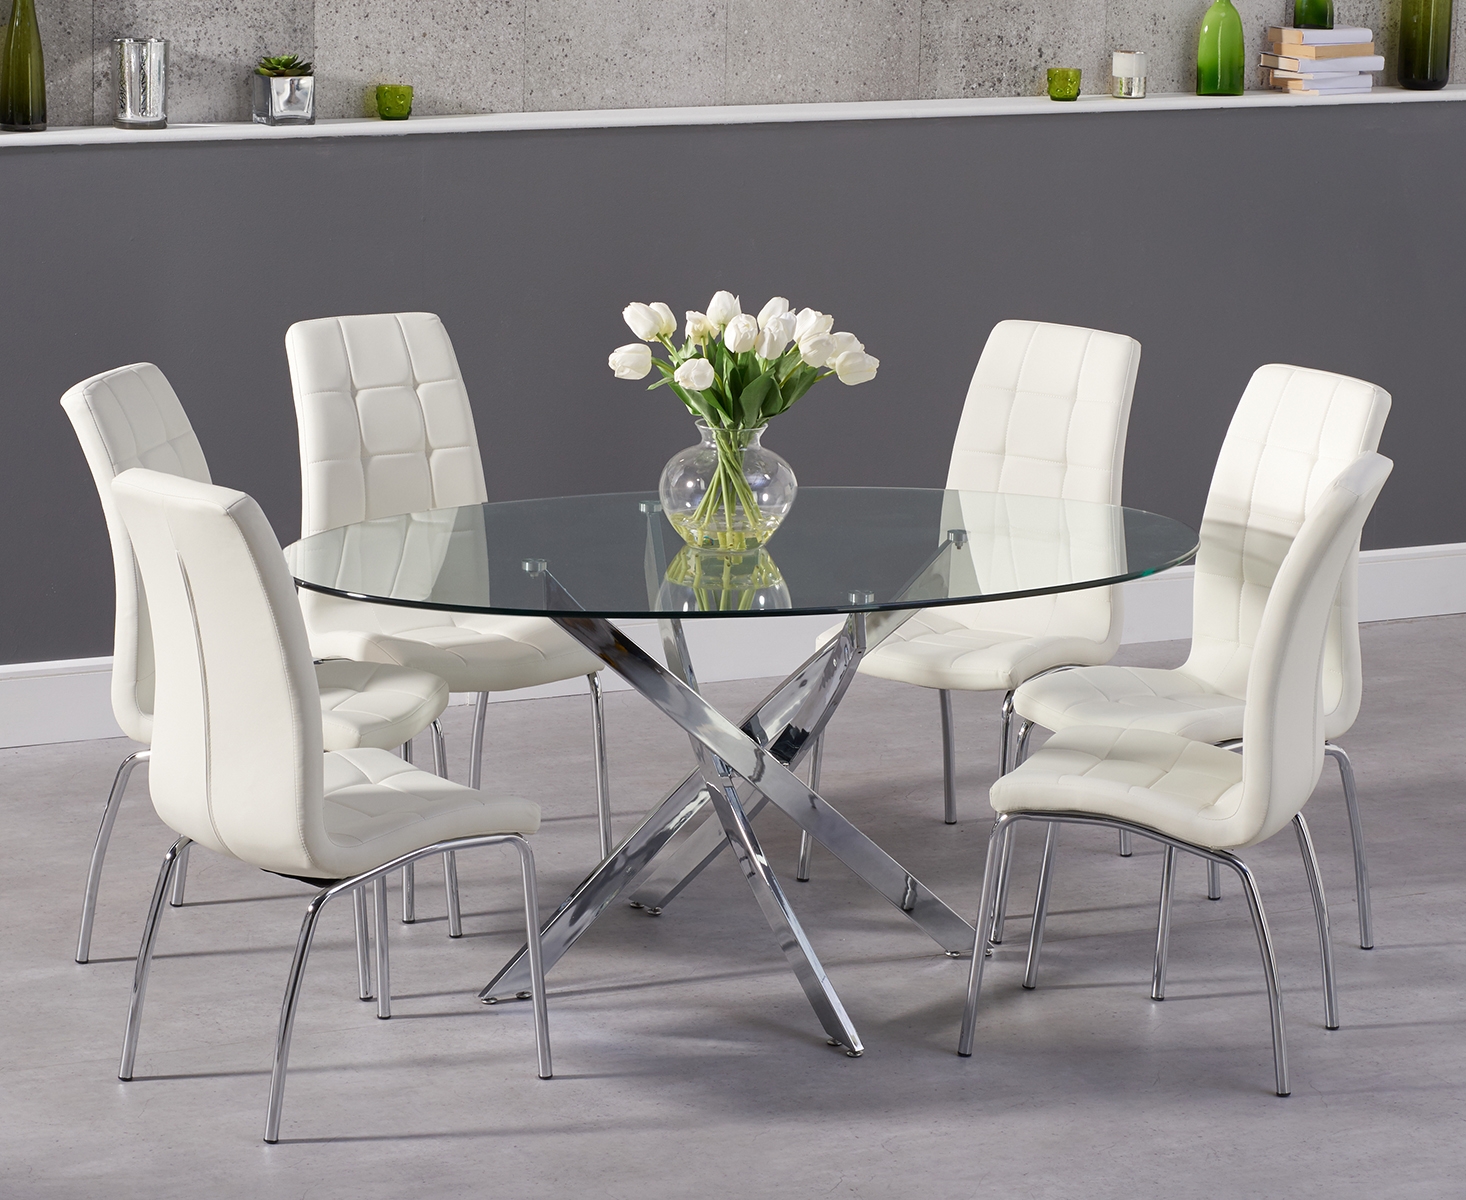 Photo 2 of Bernini 165cm oval glass dining table with 6 white enzo chairs